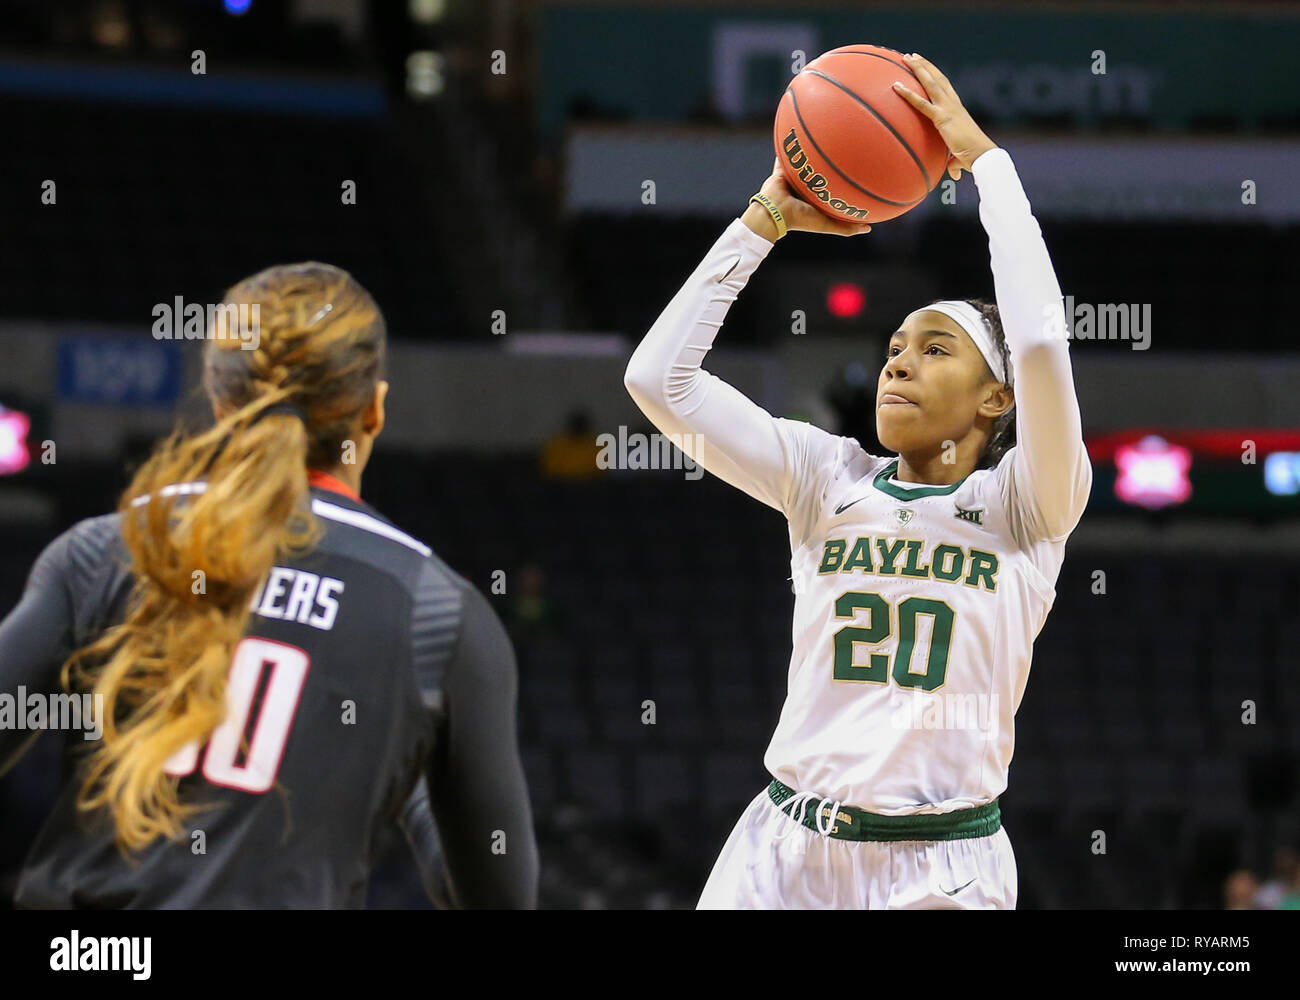 March 9, 2019: Baylor Guard Juicy Landrum (20) attempts a jump shot during a Phillips 66 Big 12 Womens Basketball Championship quarterfinal game between the Baylor Lady Bears and the Texas Tech Lady Raiders at Chesapeake Energy Arena in Oklahoma City, OK. Gray Siegel/CSM Stock Photo